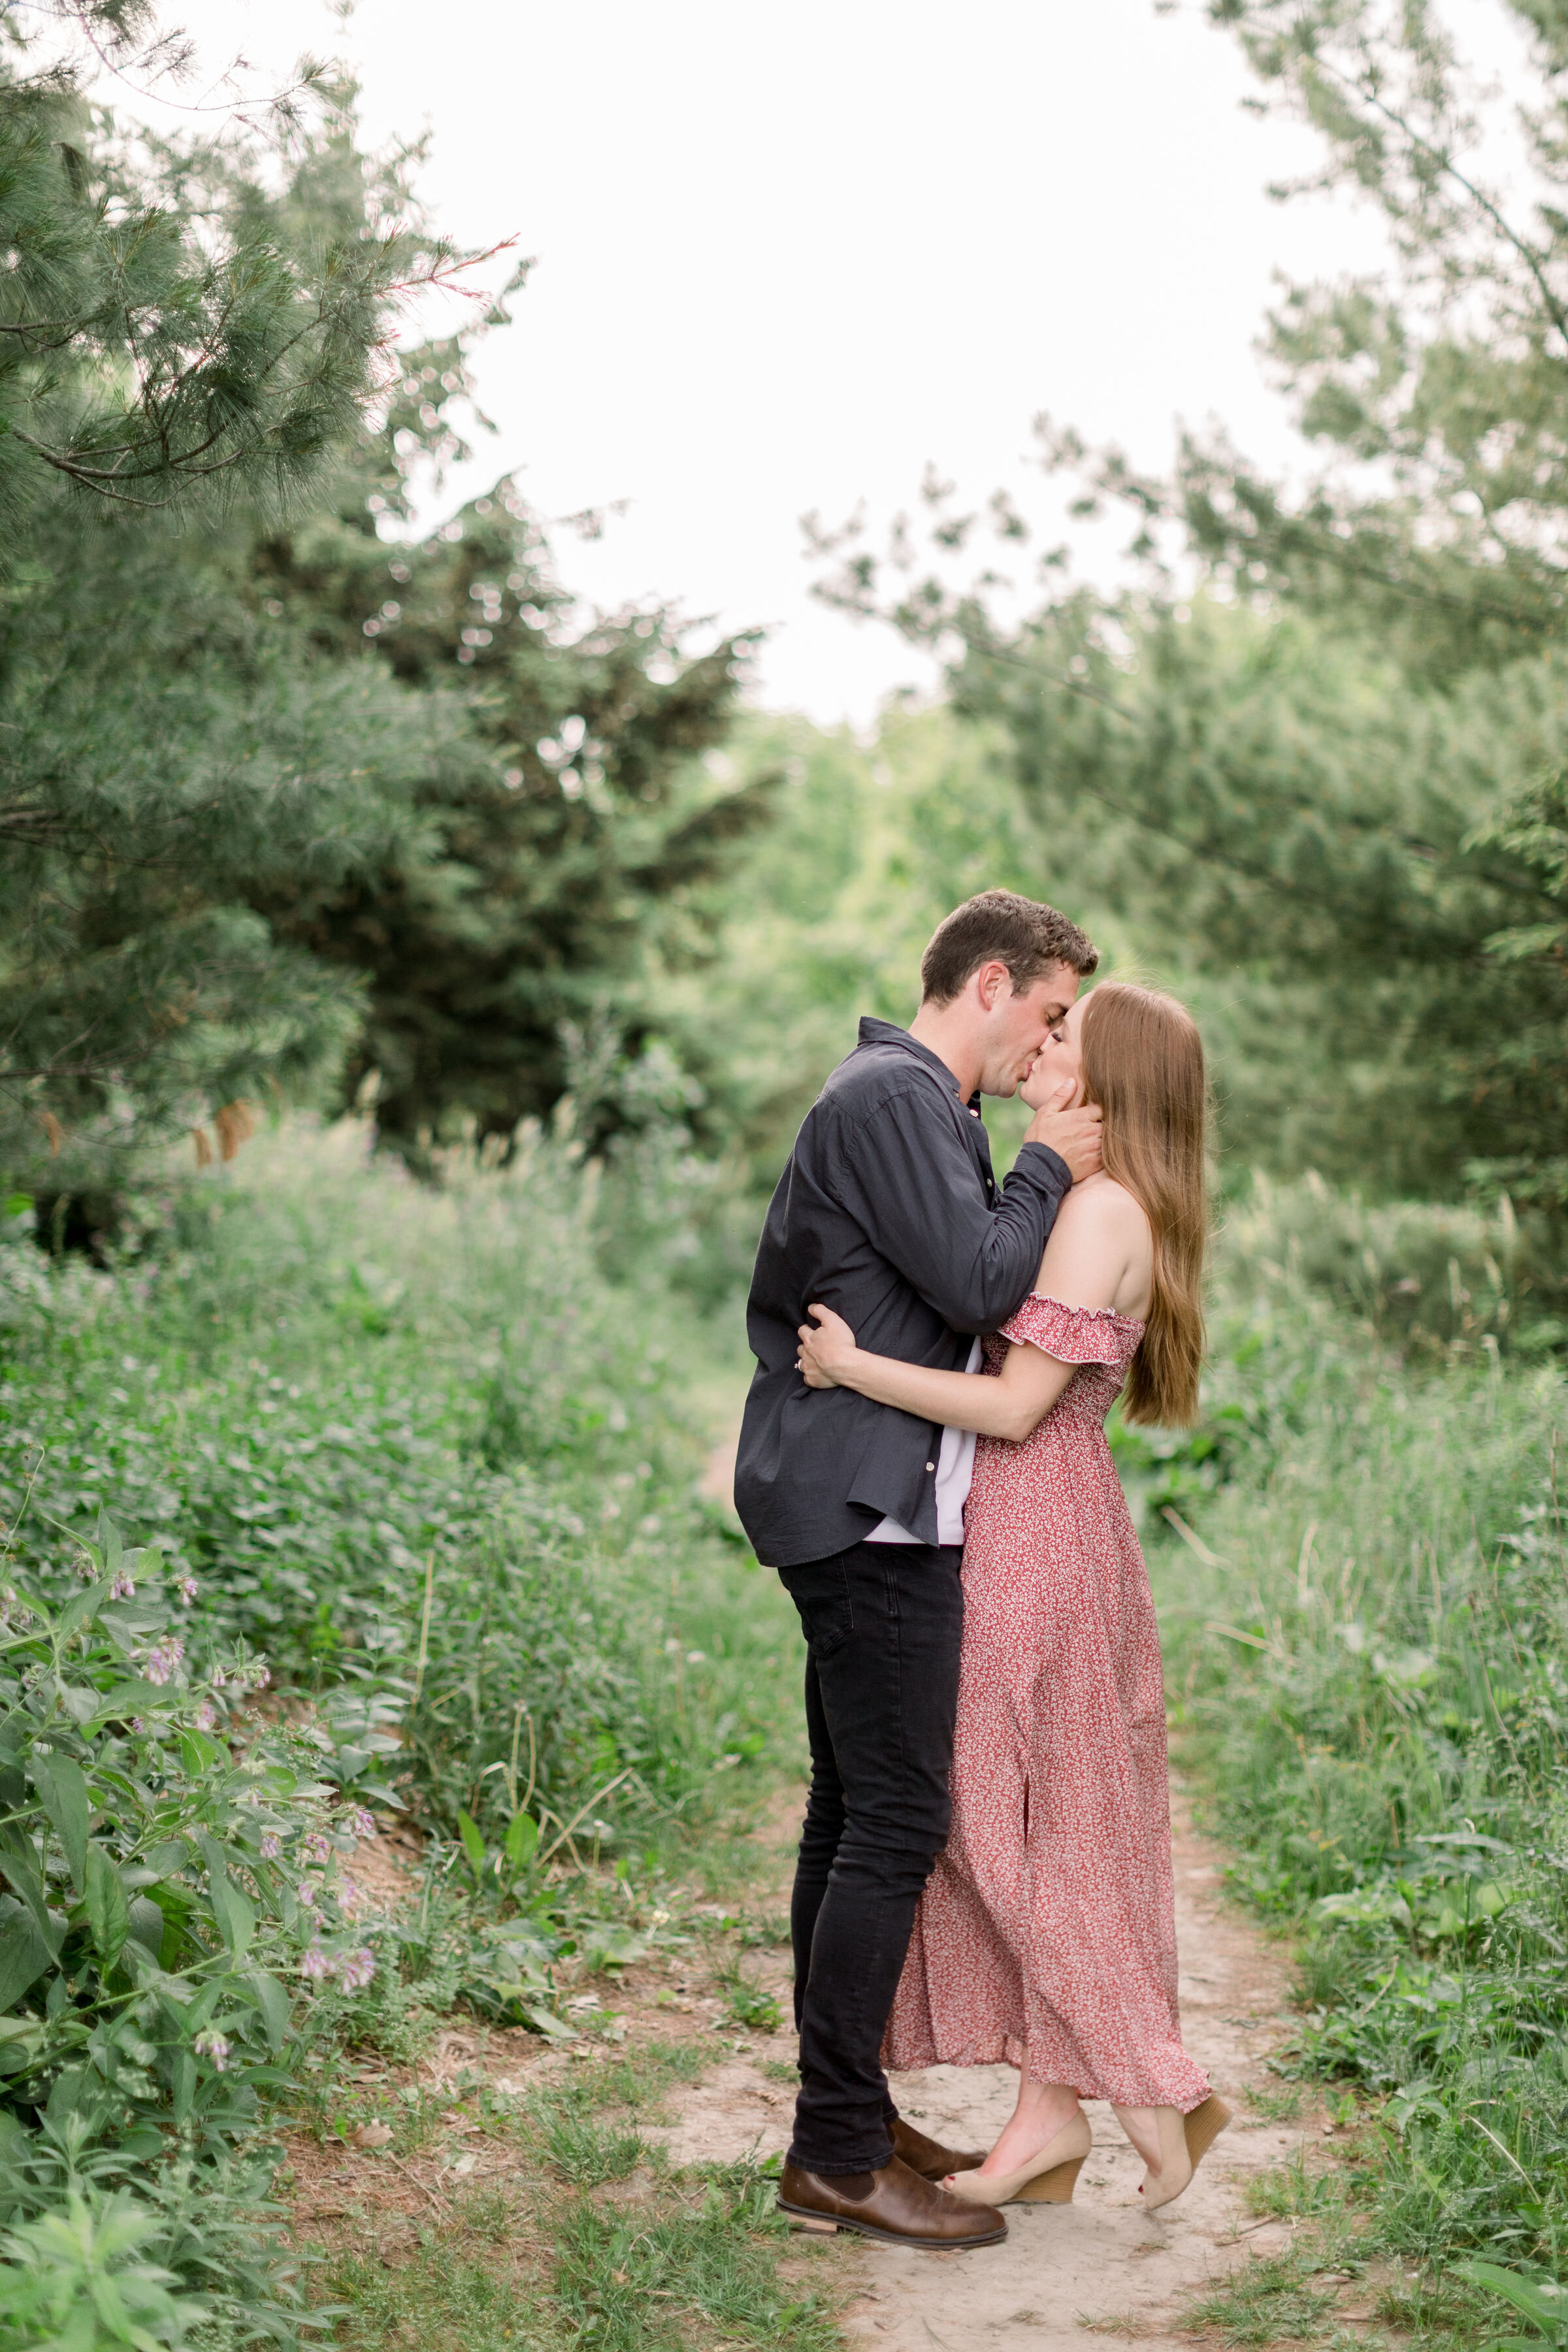  In a shaded unpaved pathway in Arboretum, Ottawa, Chelsea Mason Photography captures this engaged couple romantically kissing. couple kissing woman lifting heel formal engagement outfit inspiration women's off the shoulder maxi dress with nude wedge